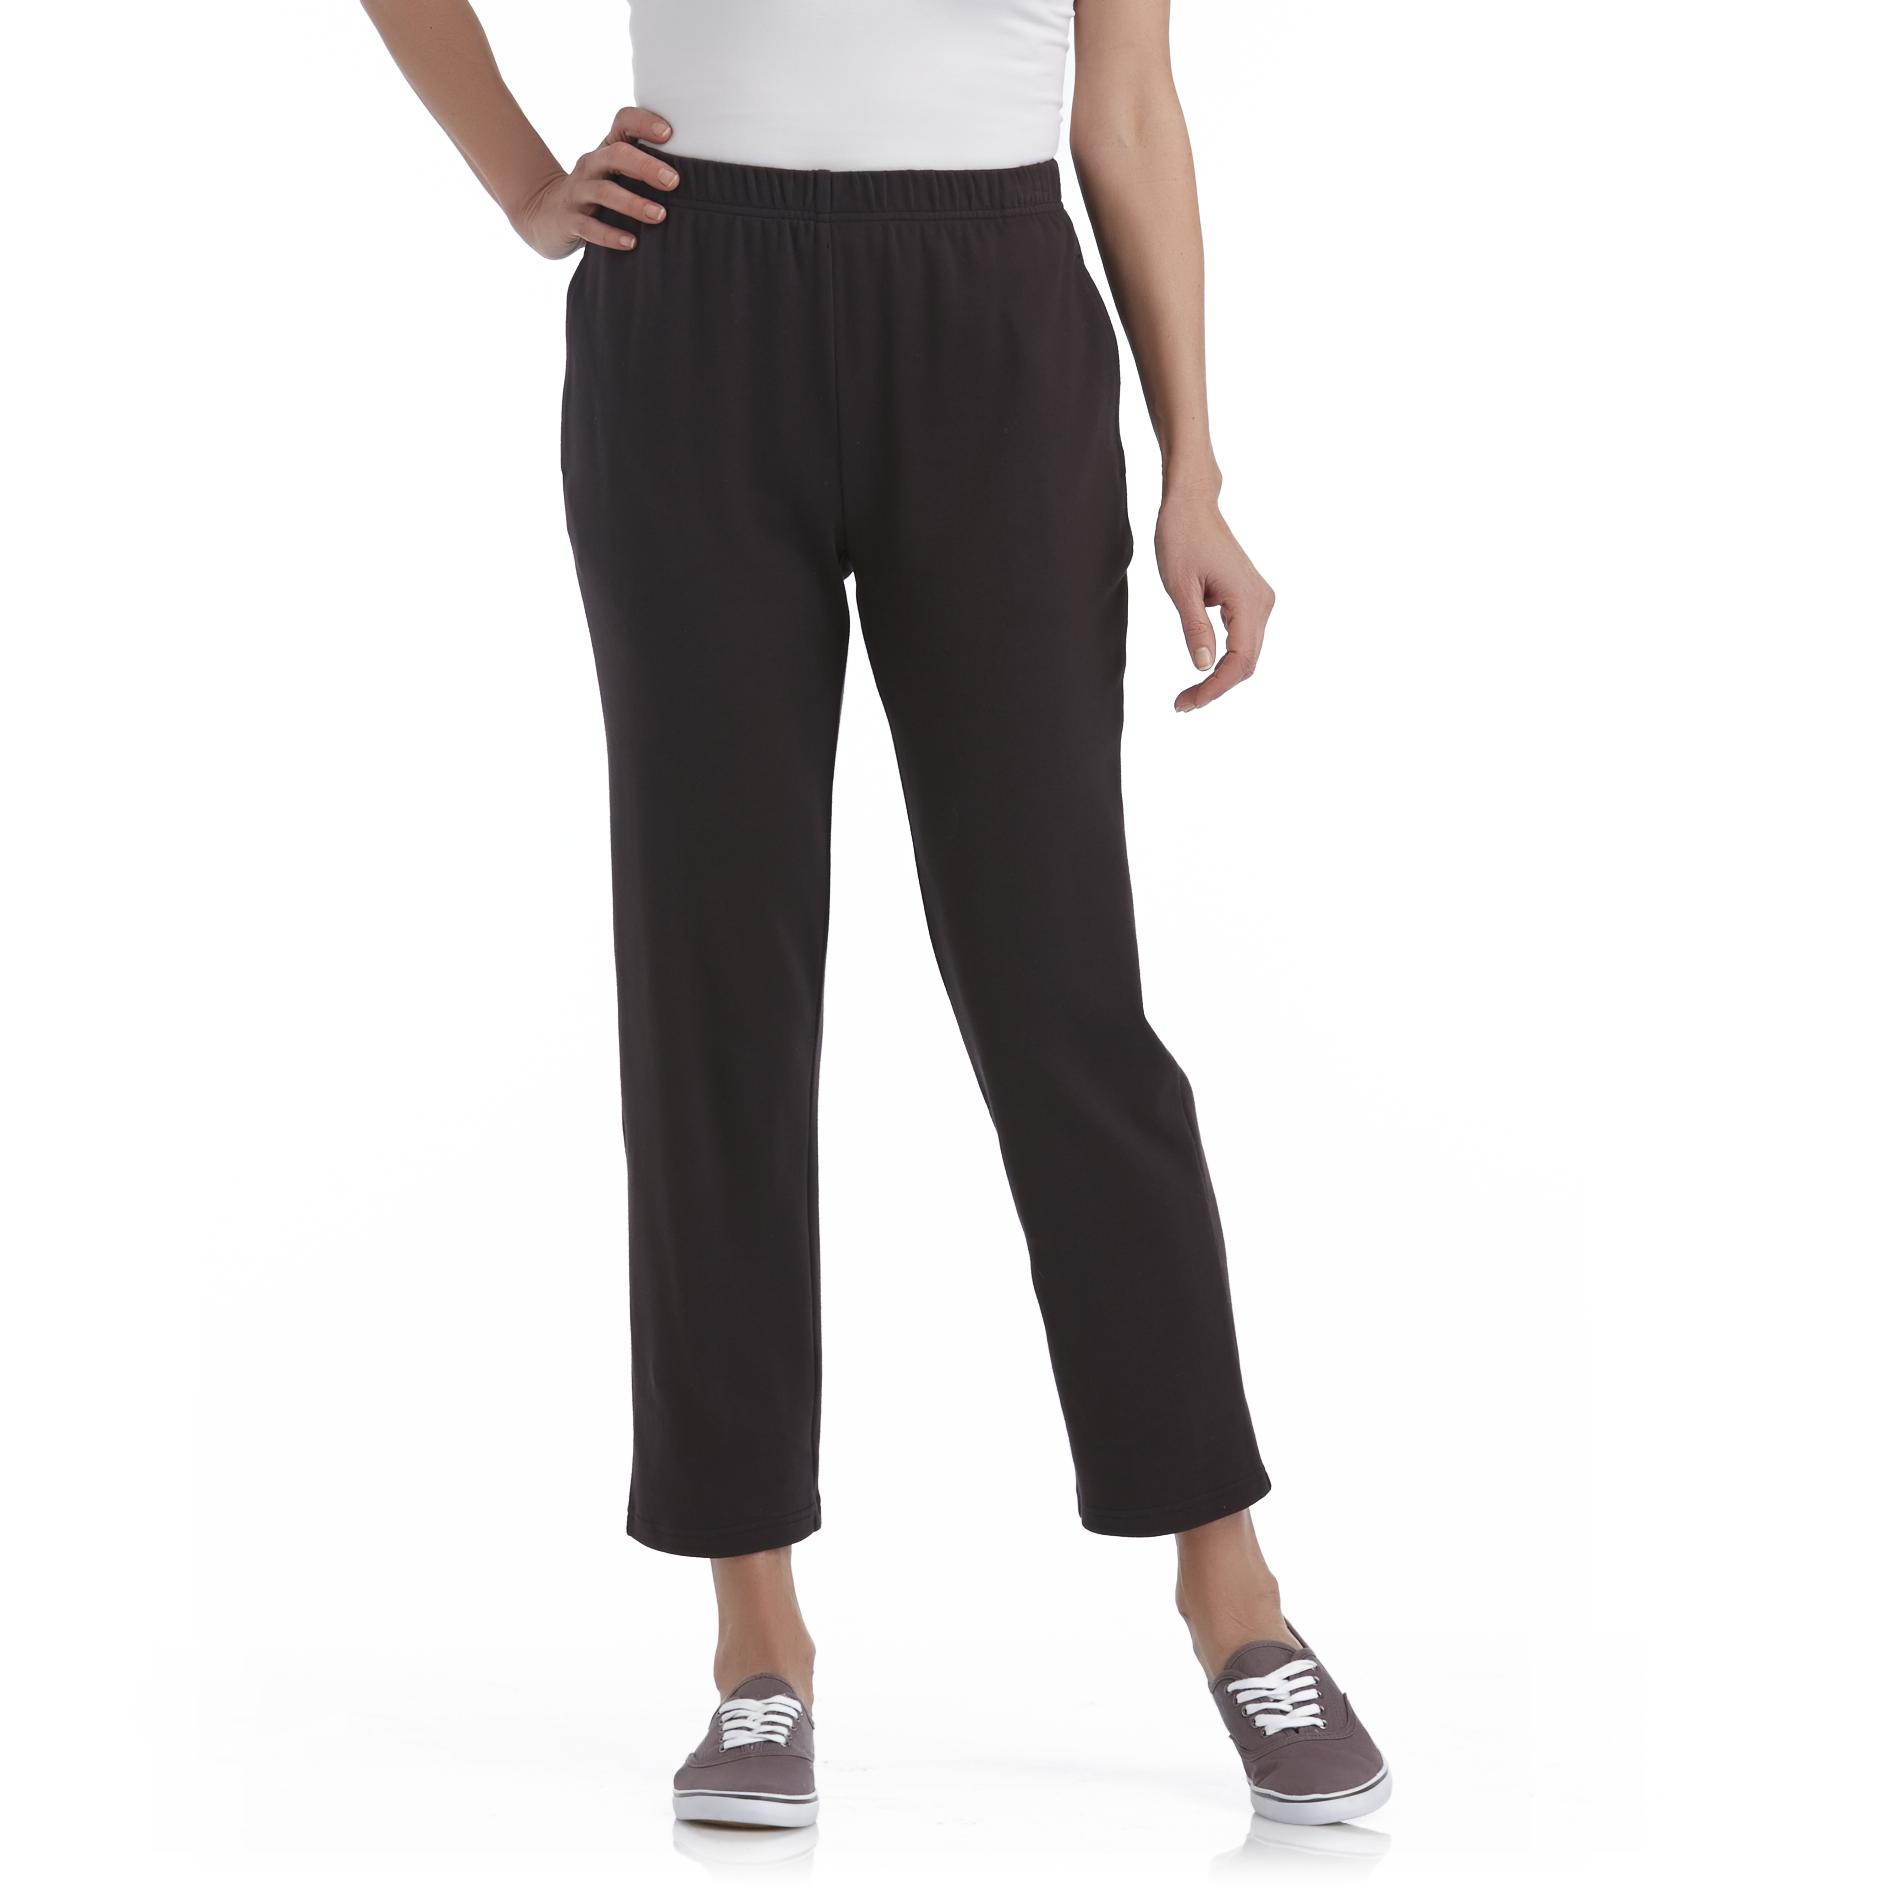 Basic Editions Women's Pull On Knit Pants | Shop Your Way: Online ...